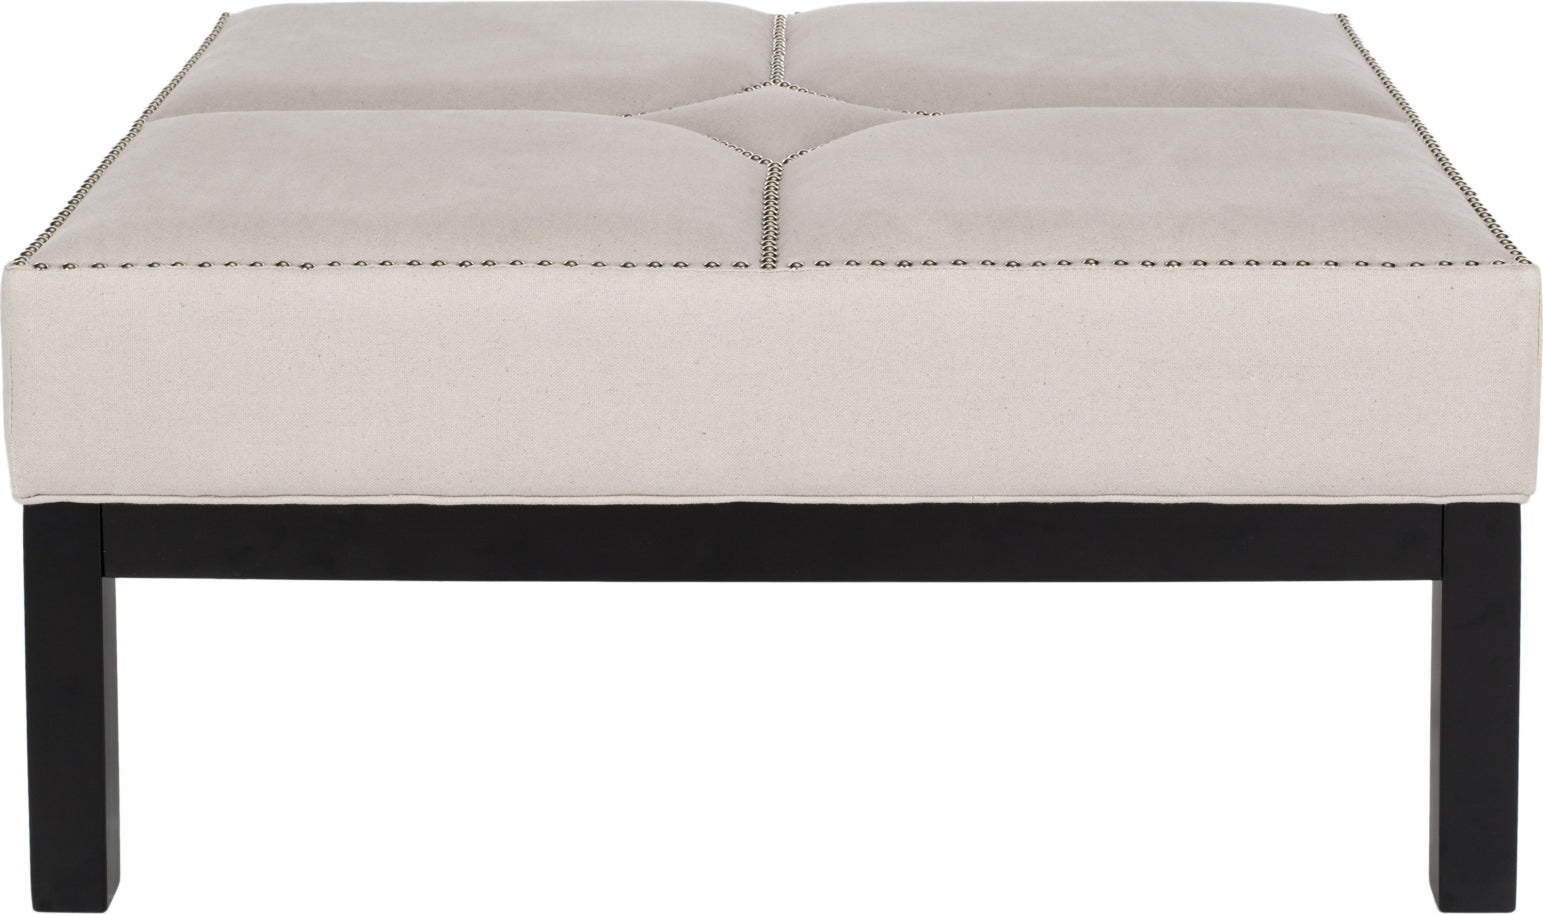 Safavieh Terrence Cocktail Ottoman-Silver Nail Heads Taupe and Black Furniture main image